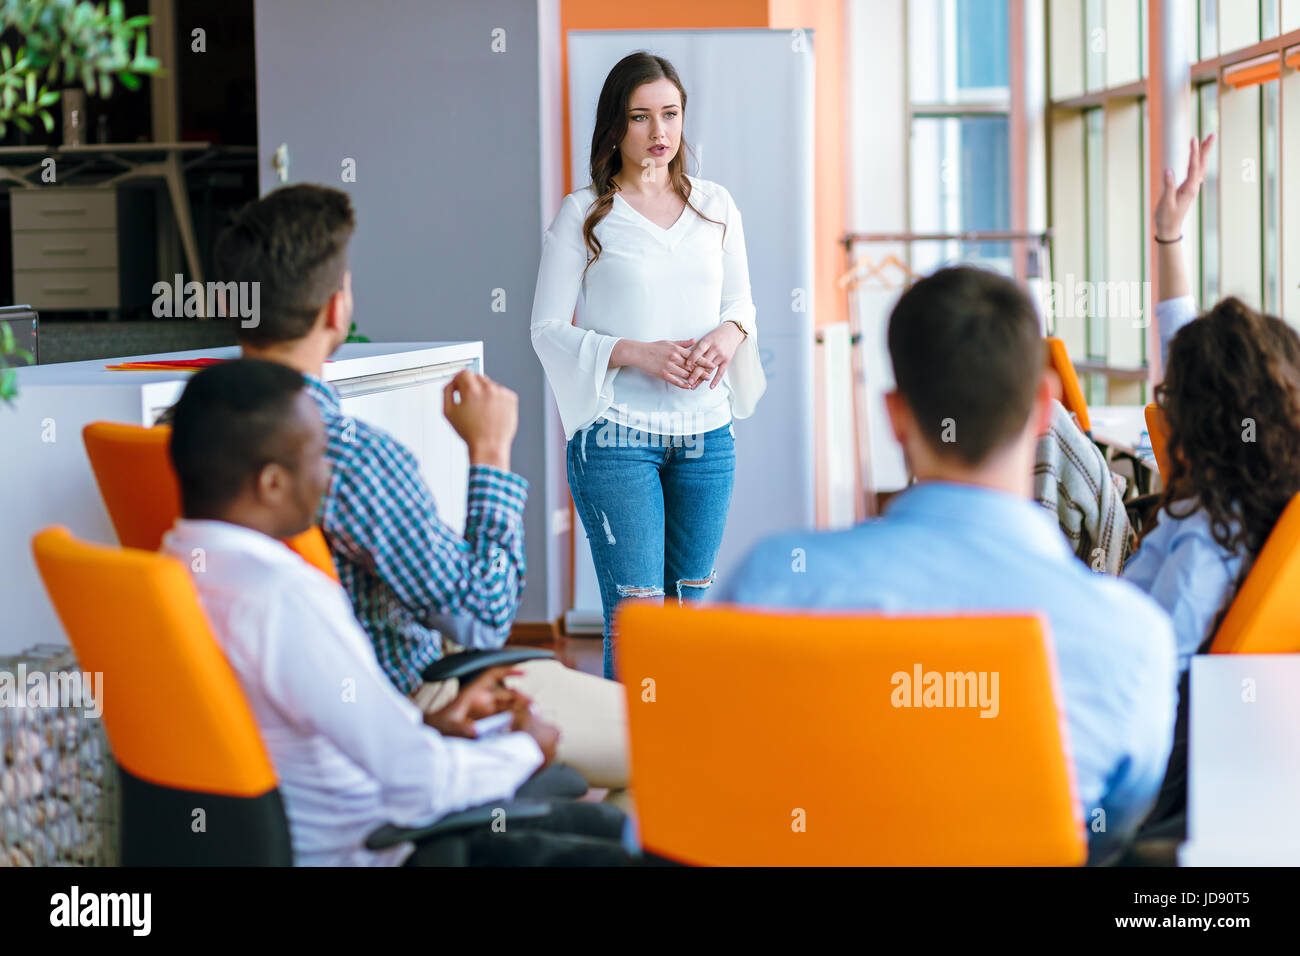 Pretty young business woman giving a presentation in conference or meeting setting. Stock Photo